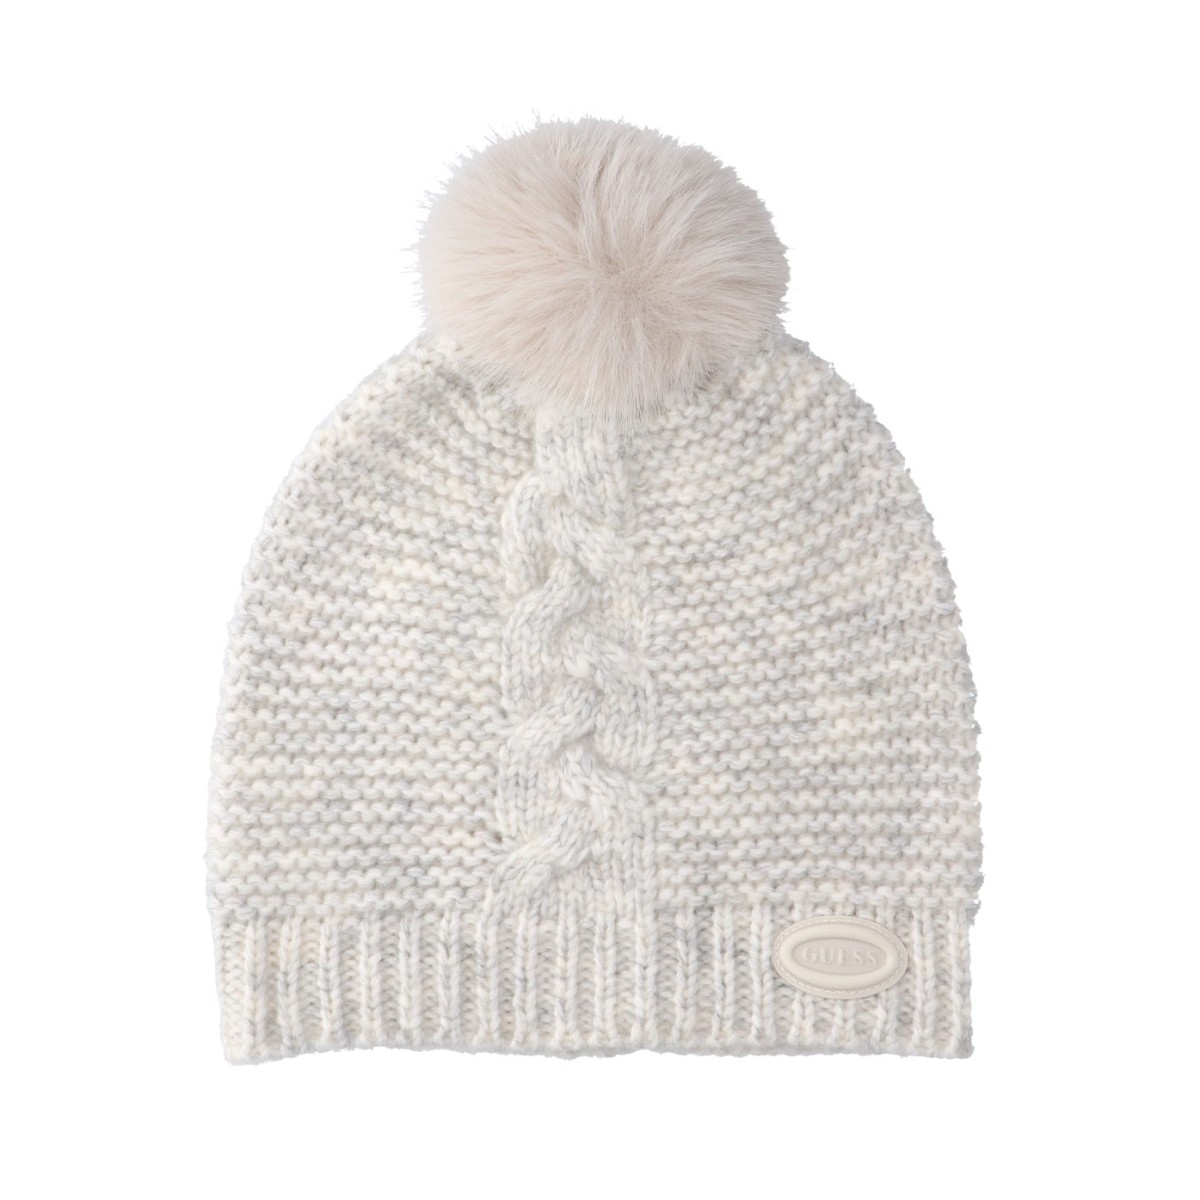 Guess Cappello Bianco spento AW9975WOL01